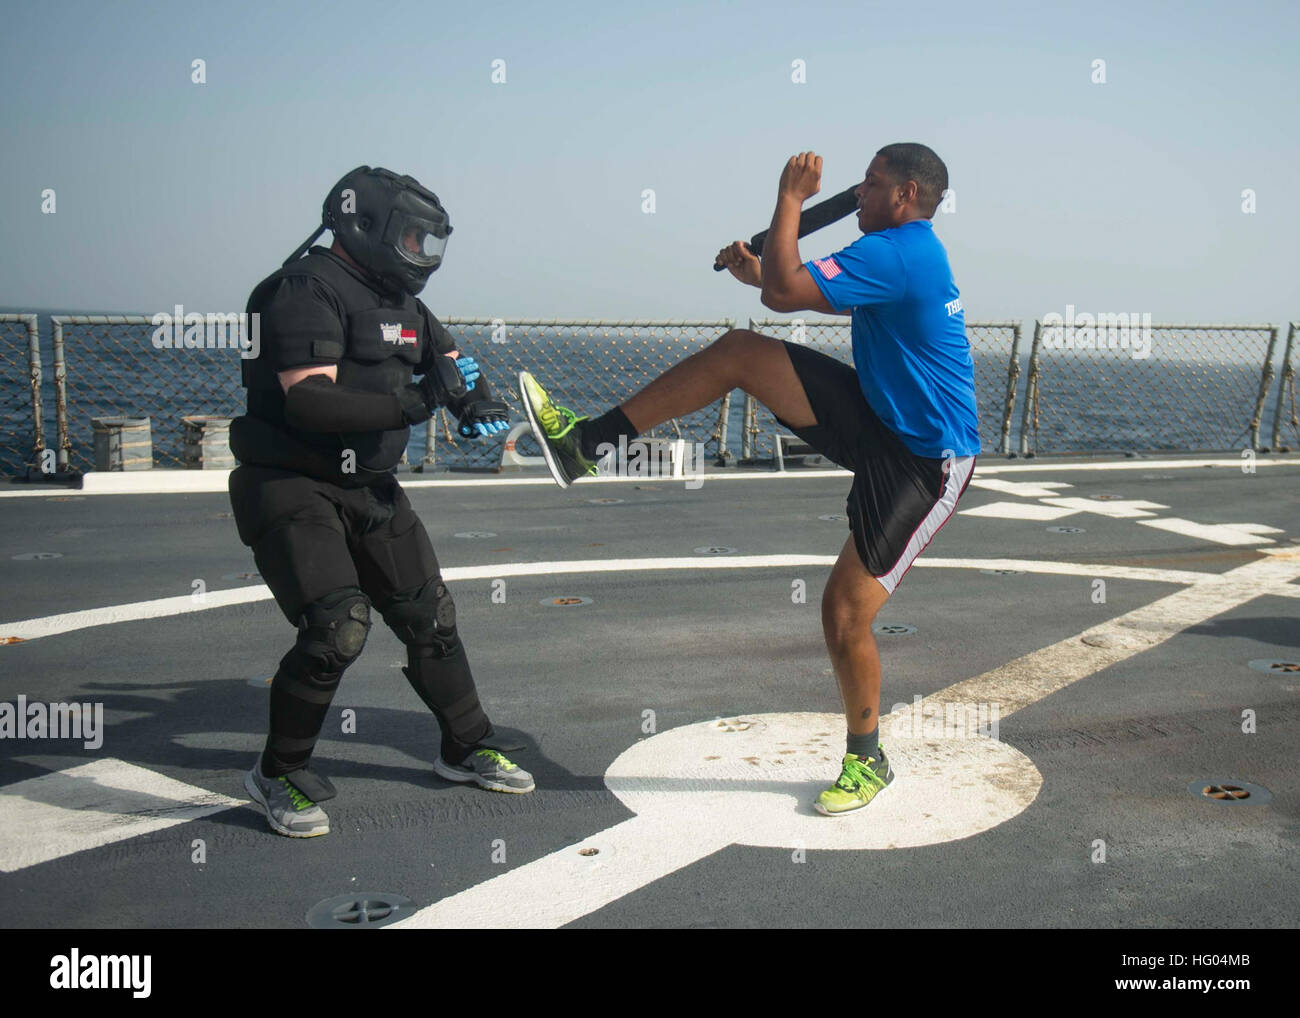 161003-N-GP524-508 ARABIAN GULF (Oct. 3, 2016) Ensign Carlos Ramos, right , conducts defensive fighting techniques after being sprayed with oleoresin capsicum during a security reaction forces-basic training evolution aboard the guided-missile destroyer USS Stout (DDG 55). Stout, deployed as part of the Eisenhower Carrier Strike Group, is supporting maritime security operations and theater security cooperation efforts in the U.S. 5th Fleet area of operations. (U.S. Navy photo by Petty Officer 3rd Class Bill Dodge) USS STOUT (DDG 55) DEPLOYMENT 2016 161003-N-GP524-508 Stock Photo